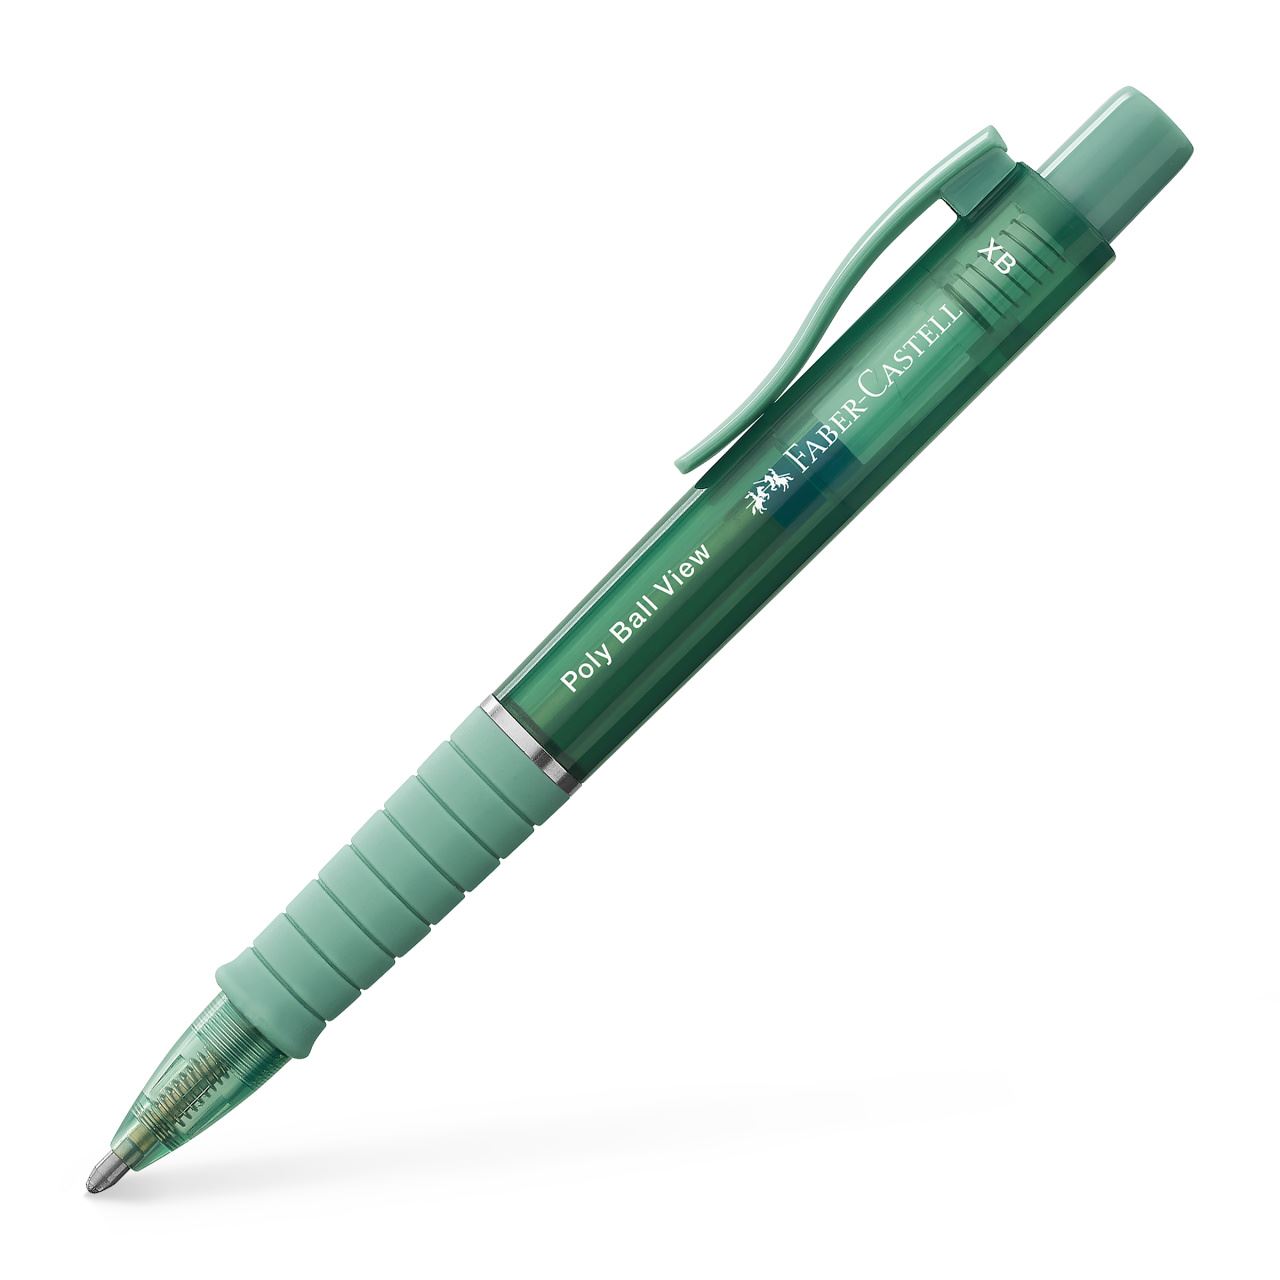 Faber-Castell - Bolígrafo Poly Ball View green lily